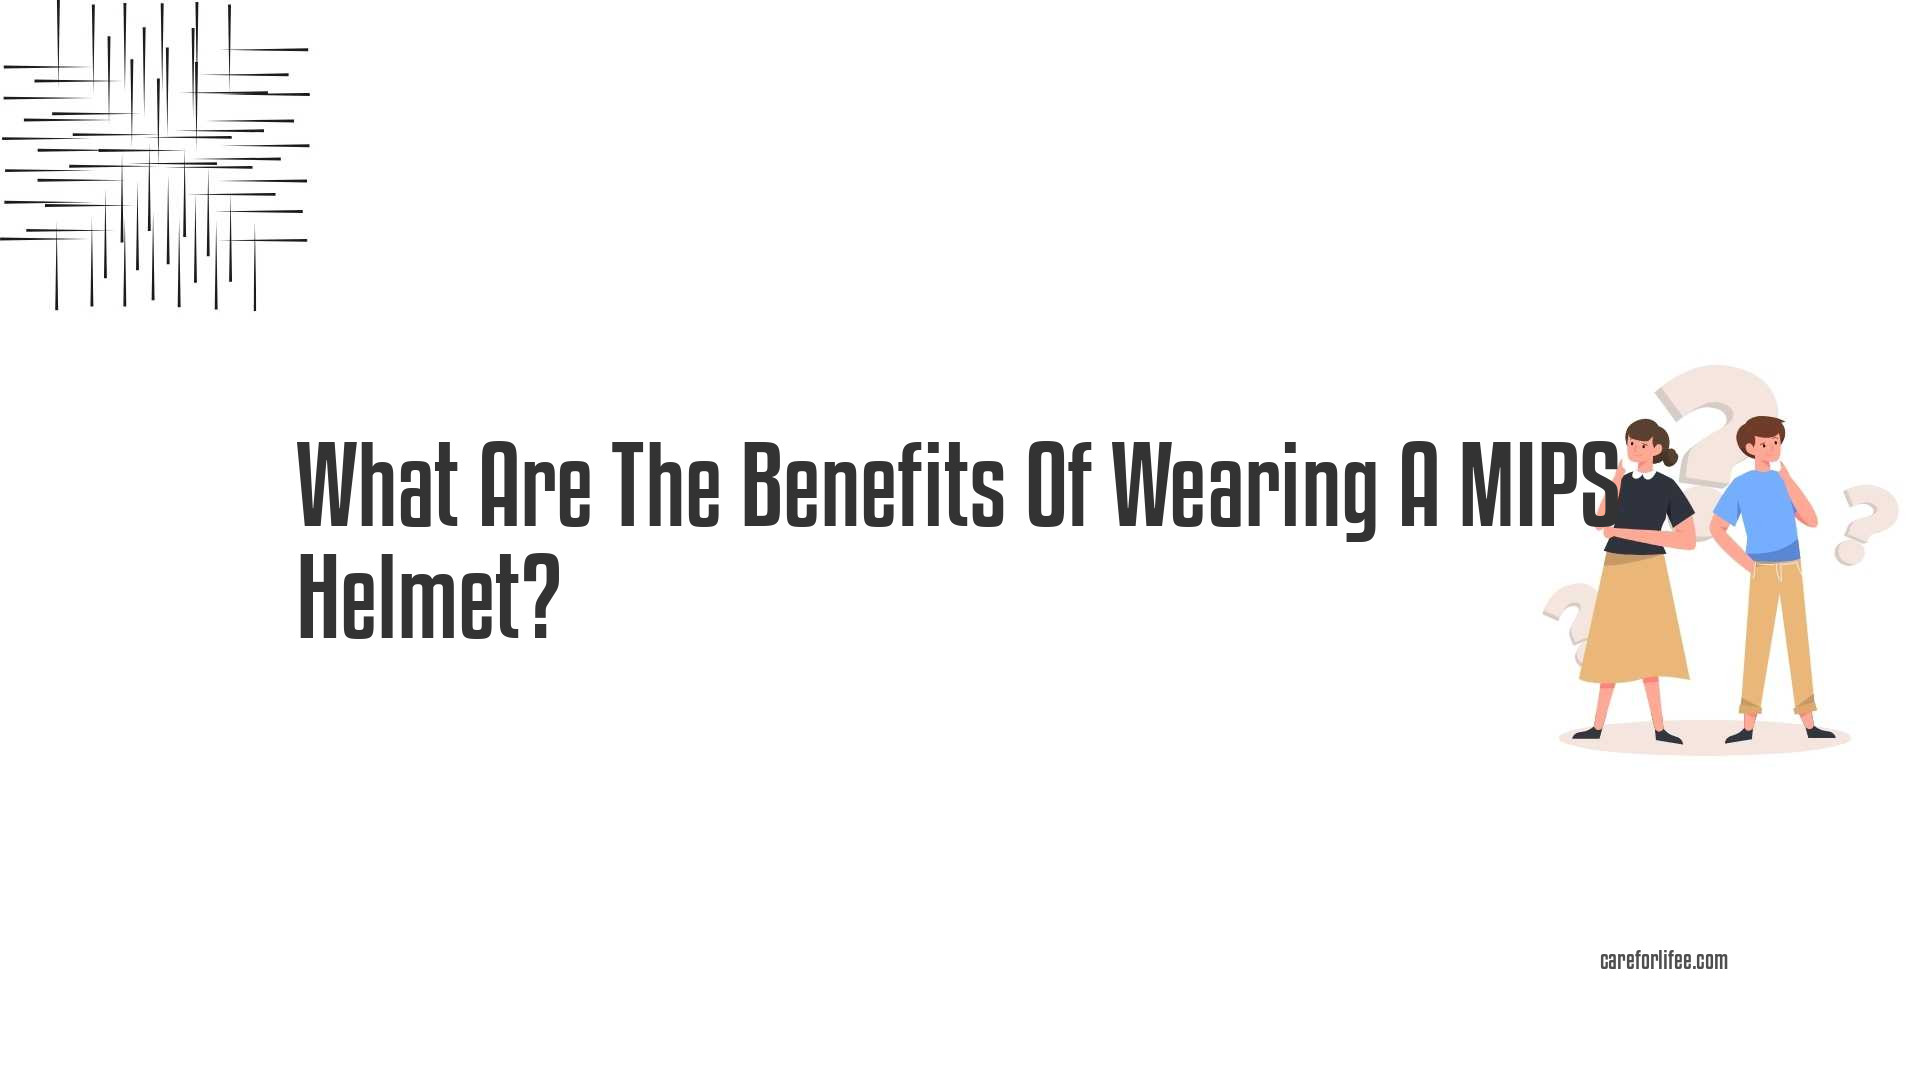 What Are The Benefits Of Wearing A MIPS Helmet?